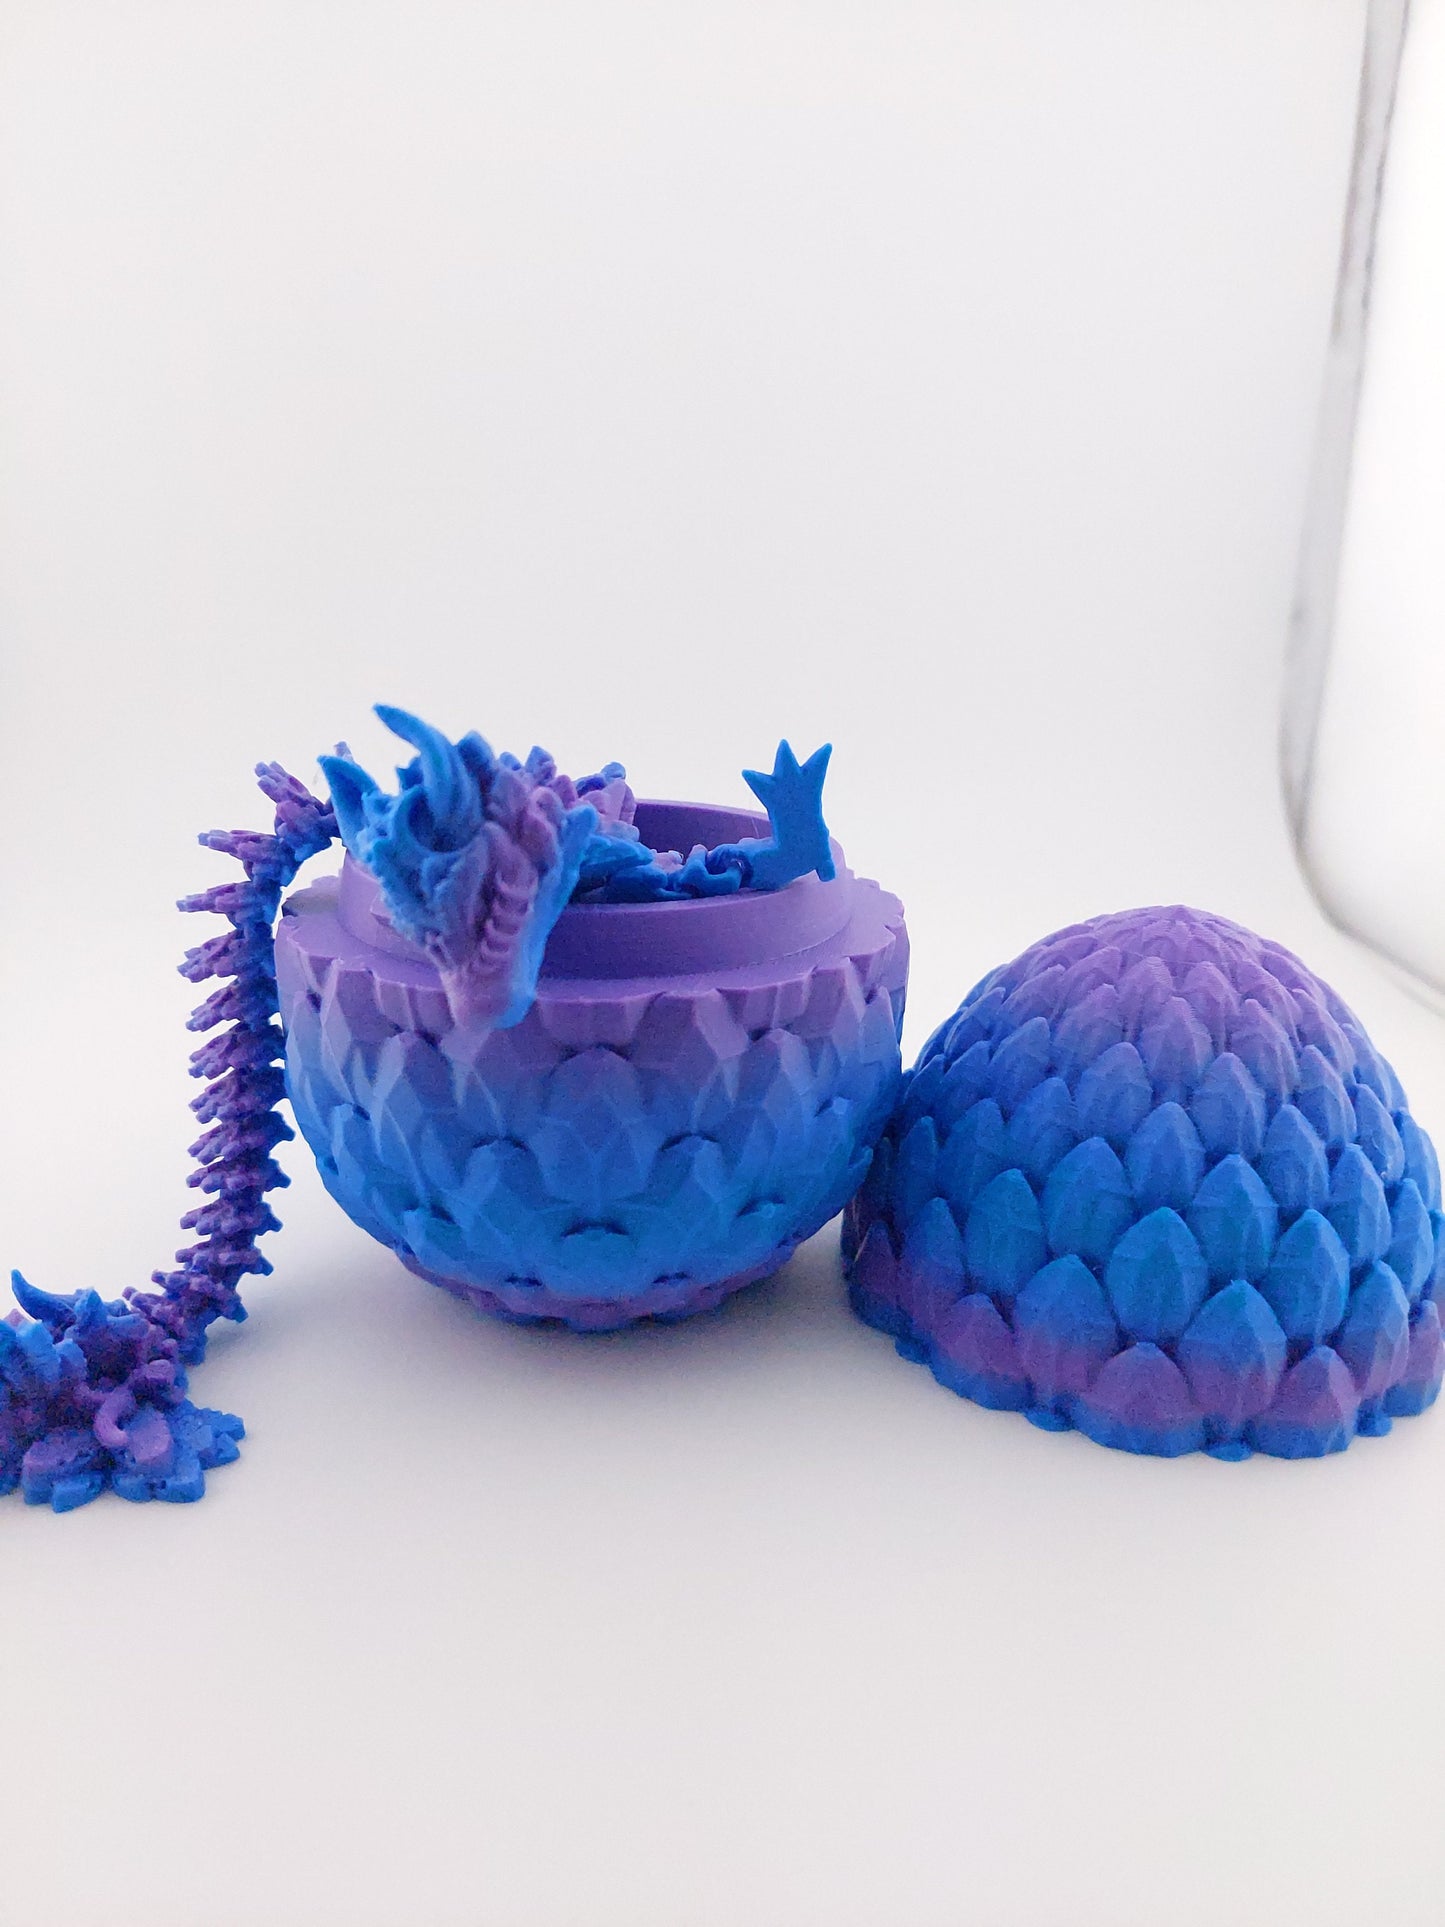 12 Inch Lunar Dragon And Matching Egg! - Sensory Stress Fidget - Articulated - Cinderwing3d - 3D Printed Dragon - Unique Gift